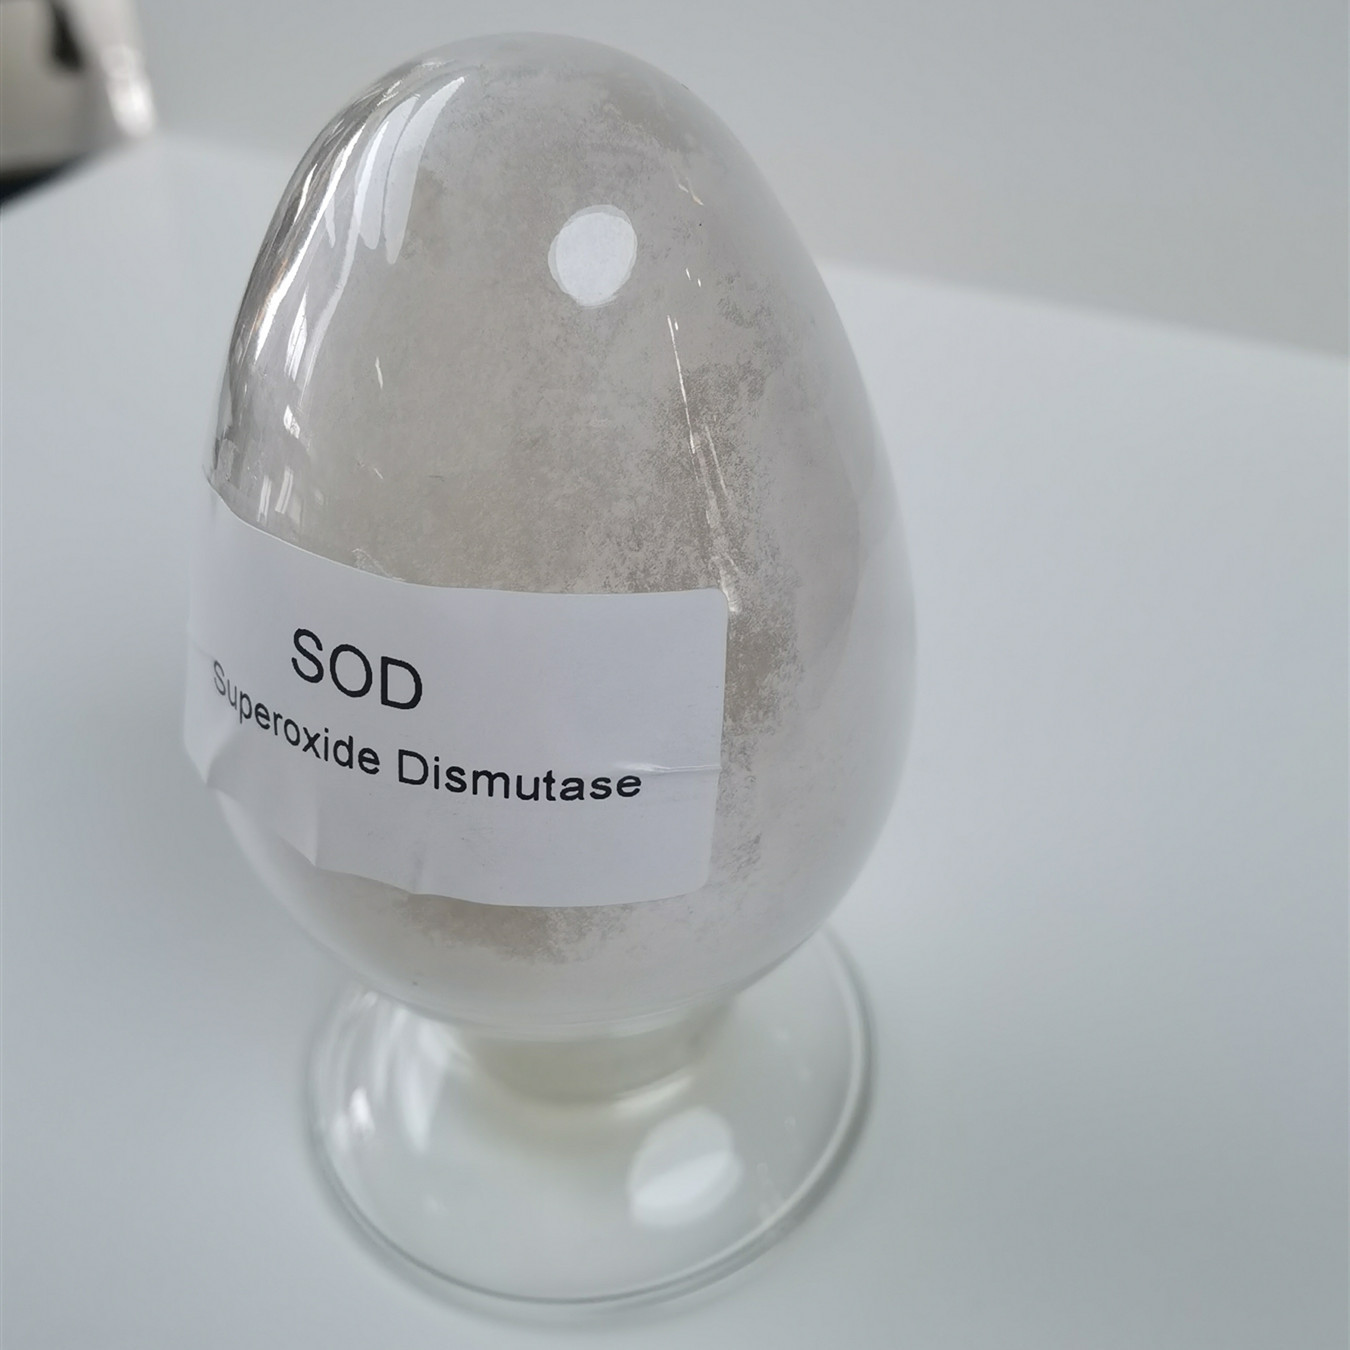  High Purity SOD Superoxide Dismutase CAS 9054 89 1 Manufactures